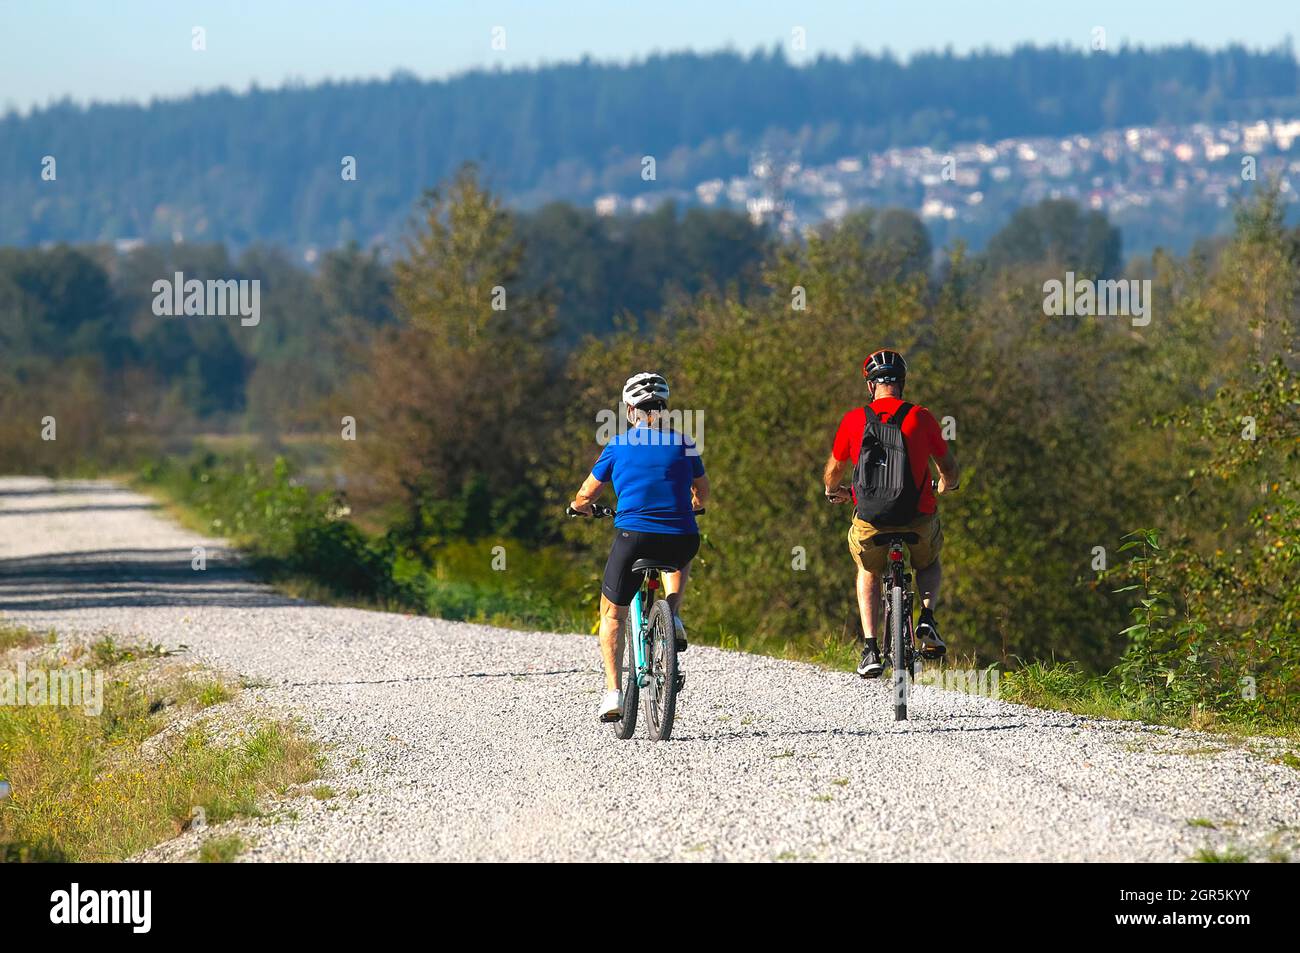 A man and woman riding bicycles on a gravel path facing away. Stock Photo